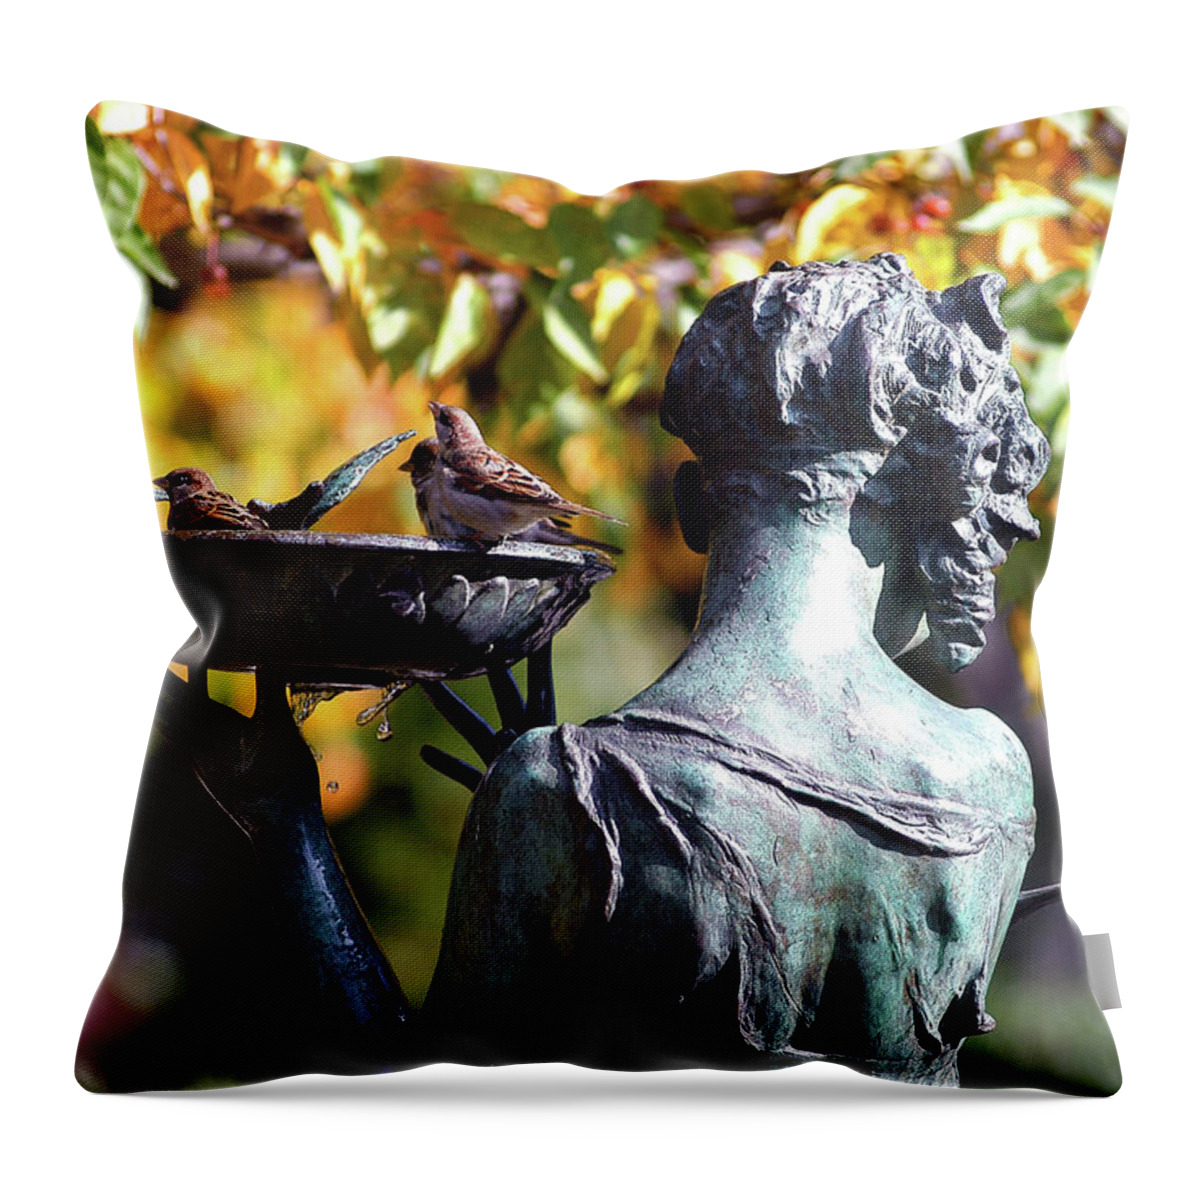  Throw Pillow featuring the photograph Listen by Yue Wang